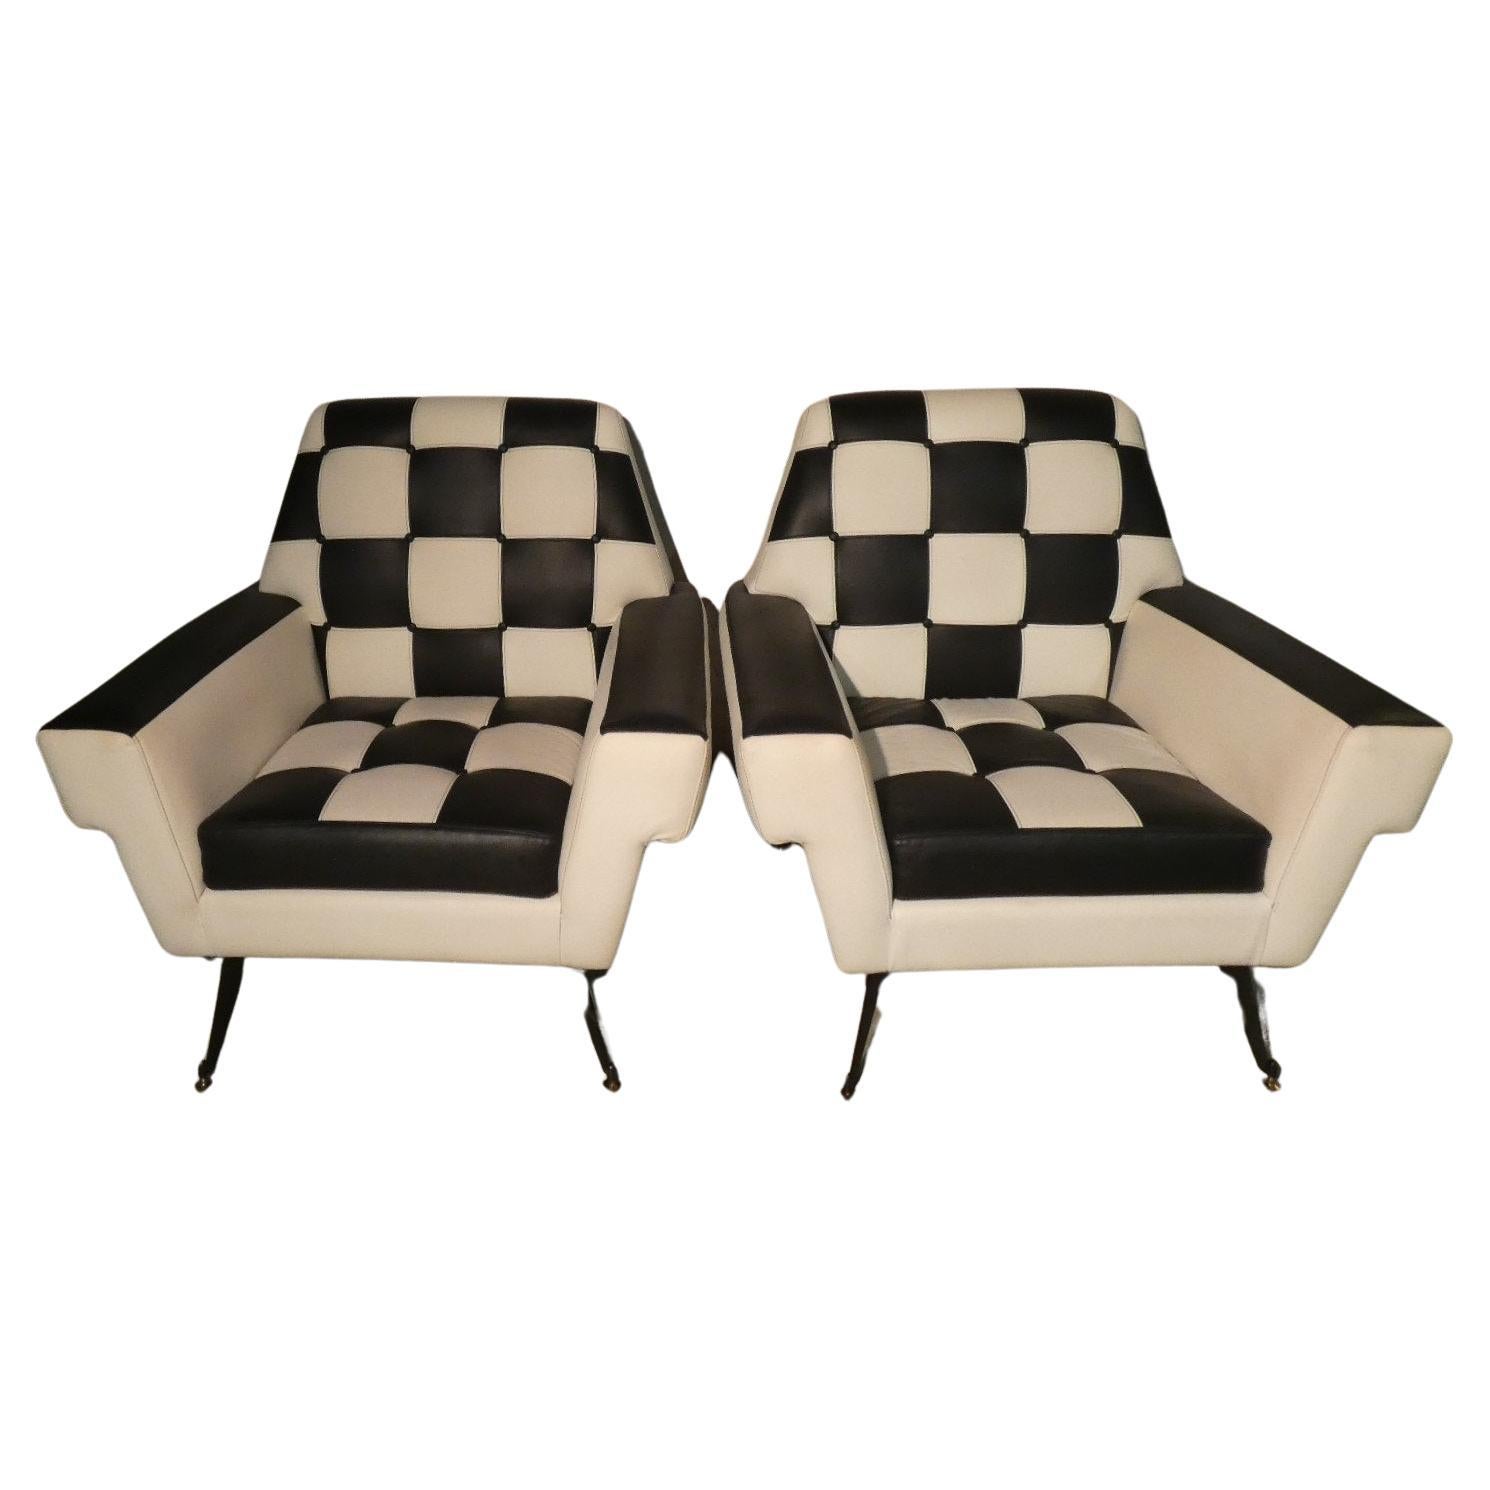 Set of 2 Abstraction Design Armchairs, 1960s